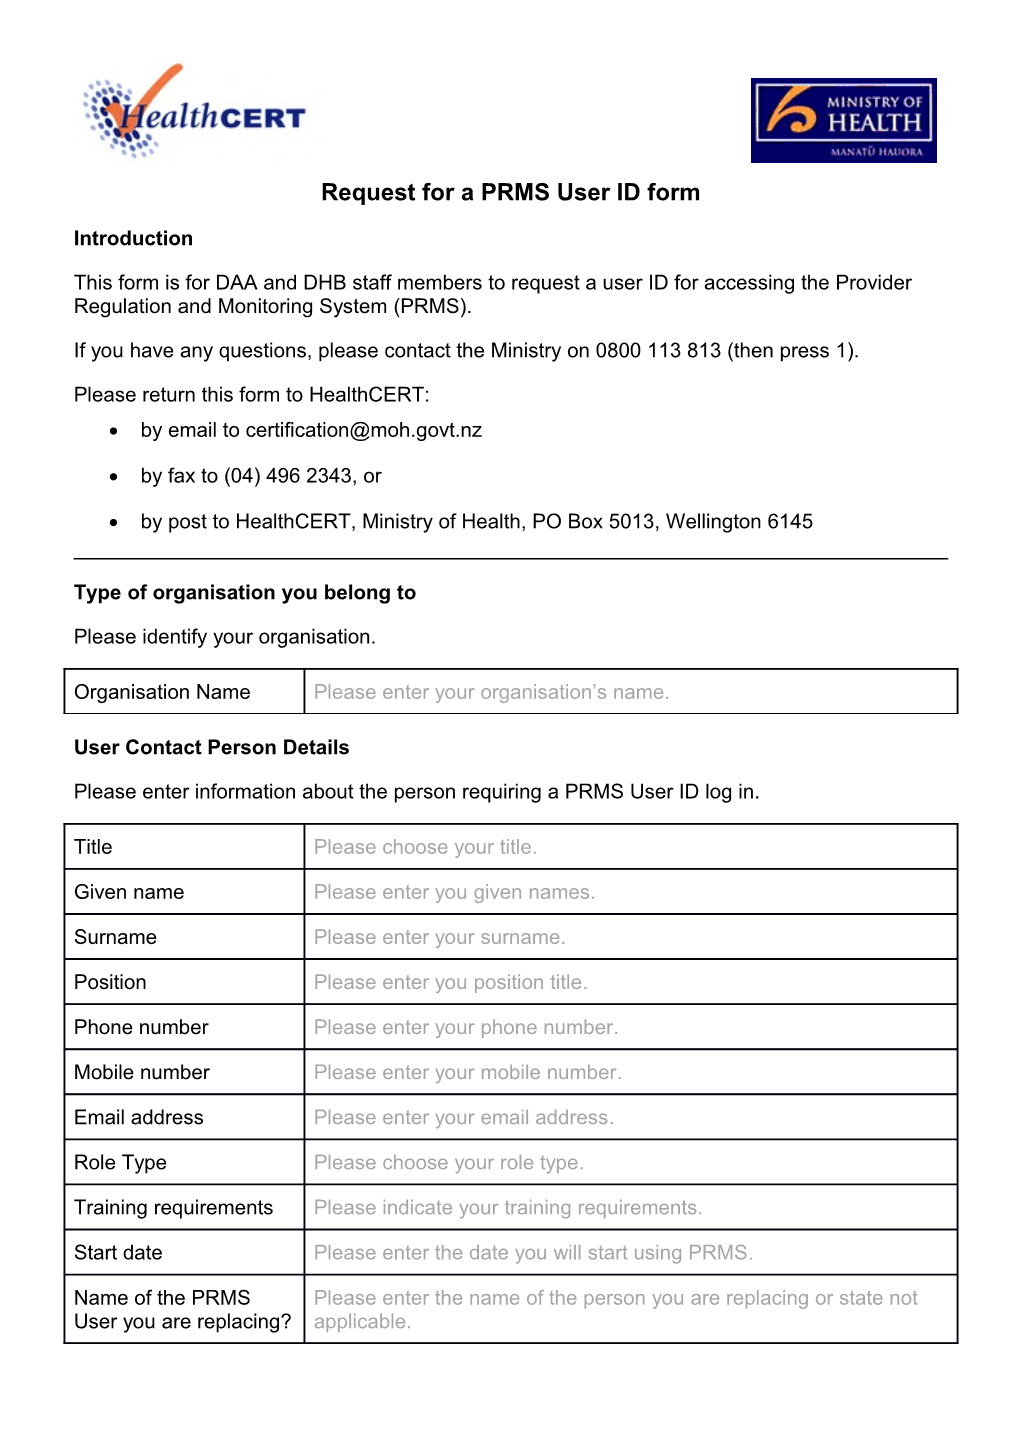 Request for a PRMS User ID Form